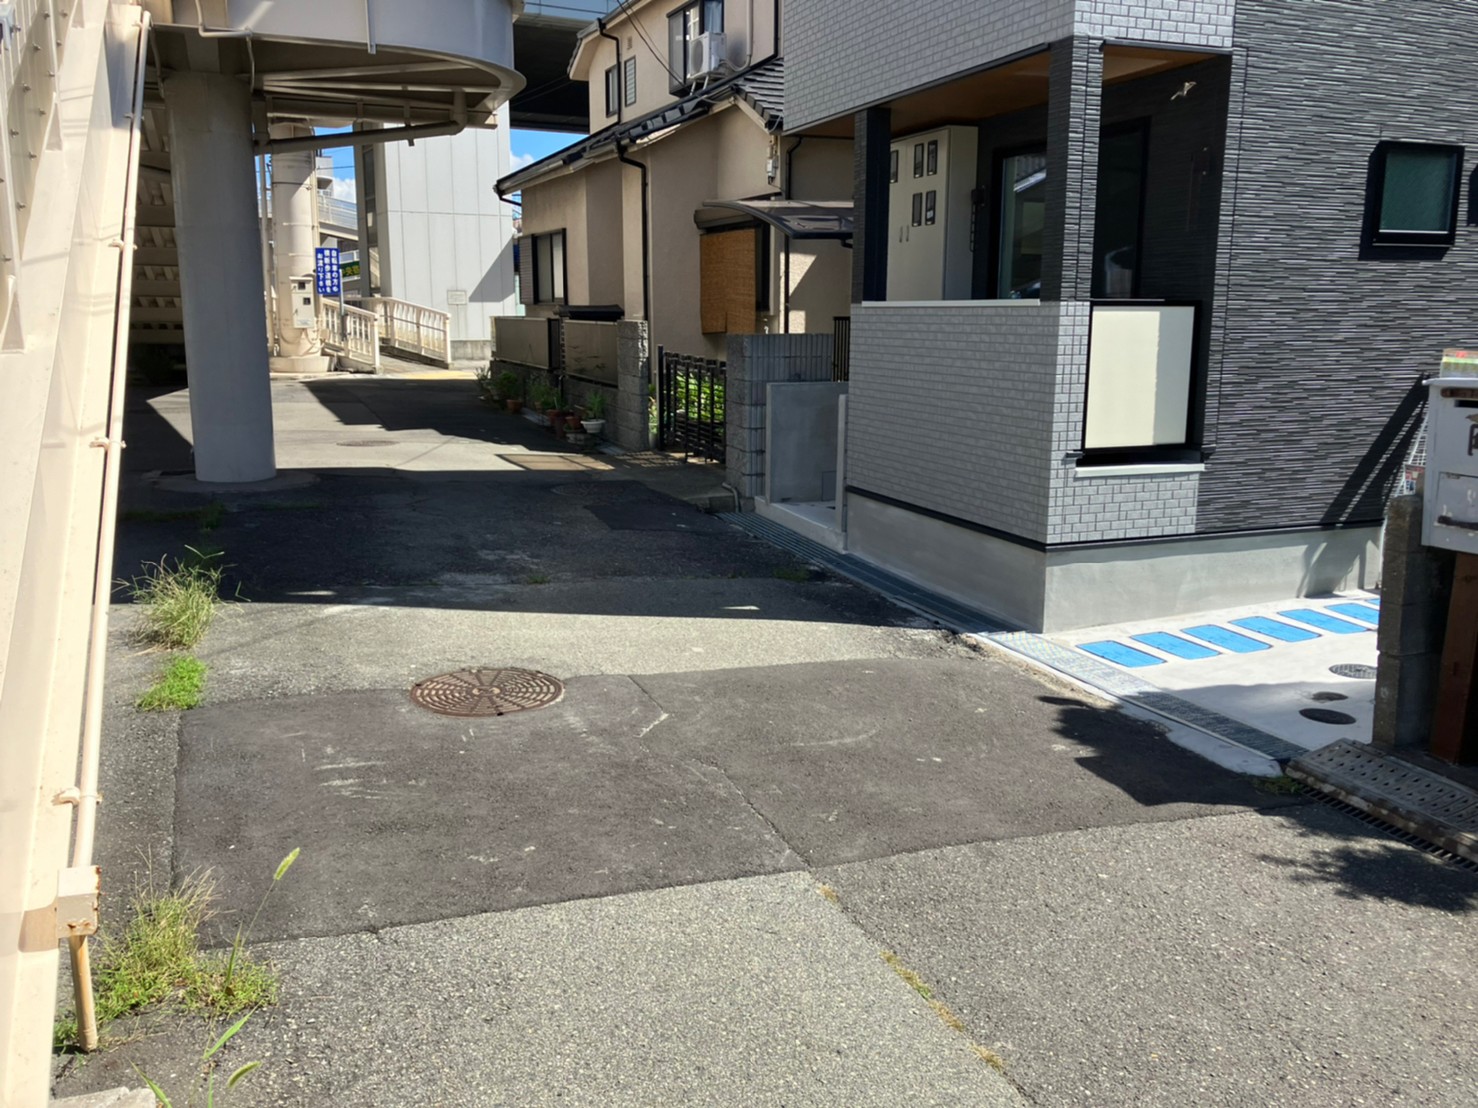 ★JR尼崎駅★尼崎市東本町、マンション前の道路です。